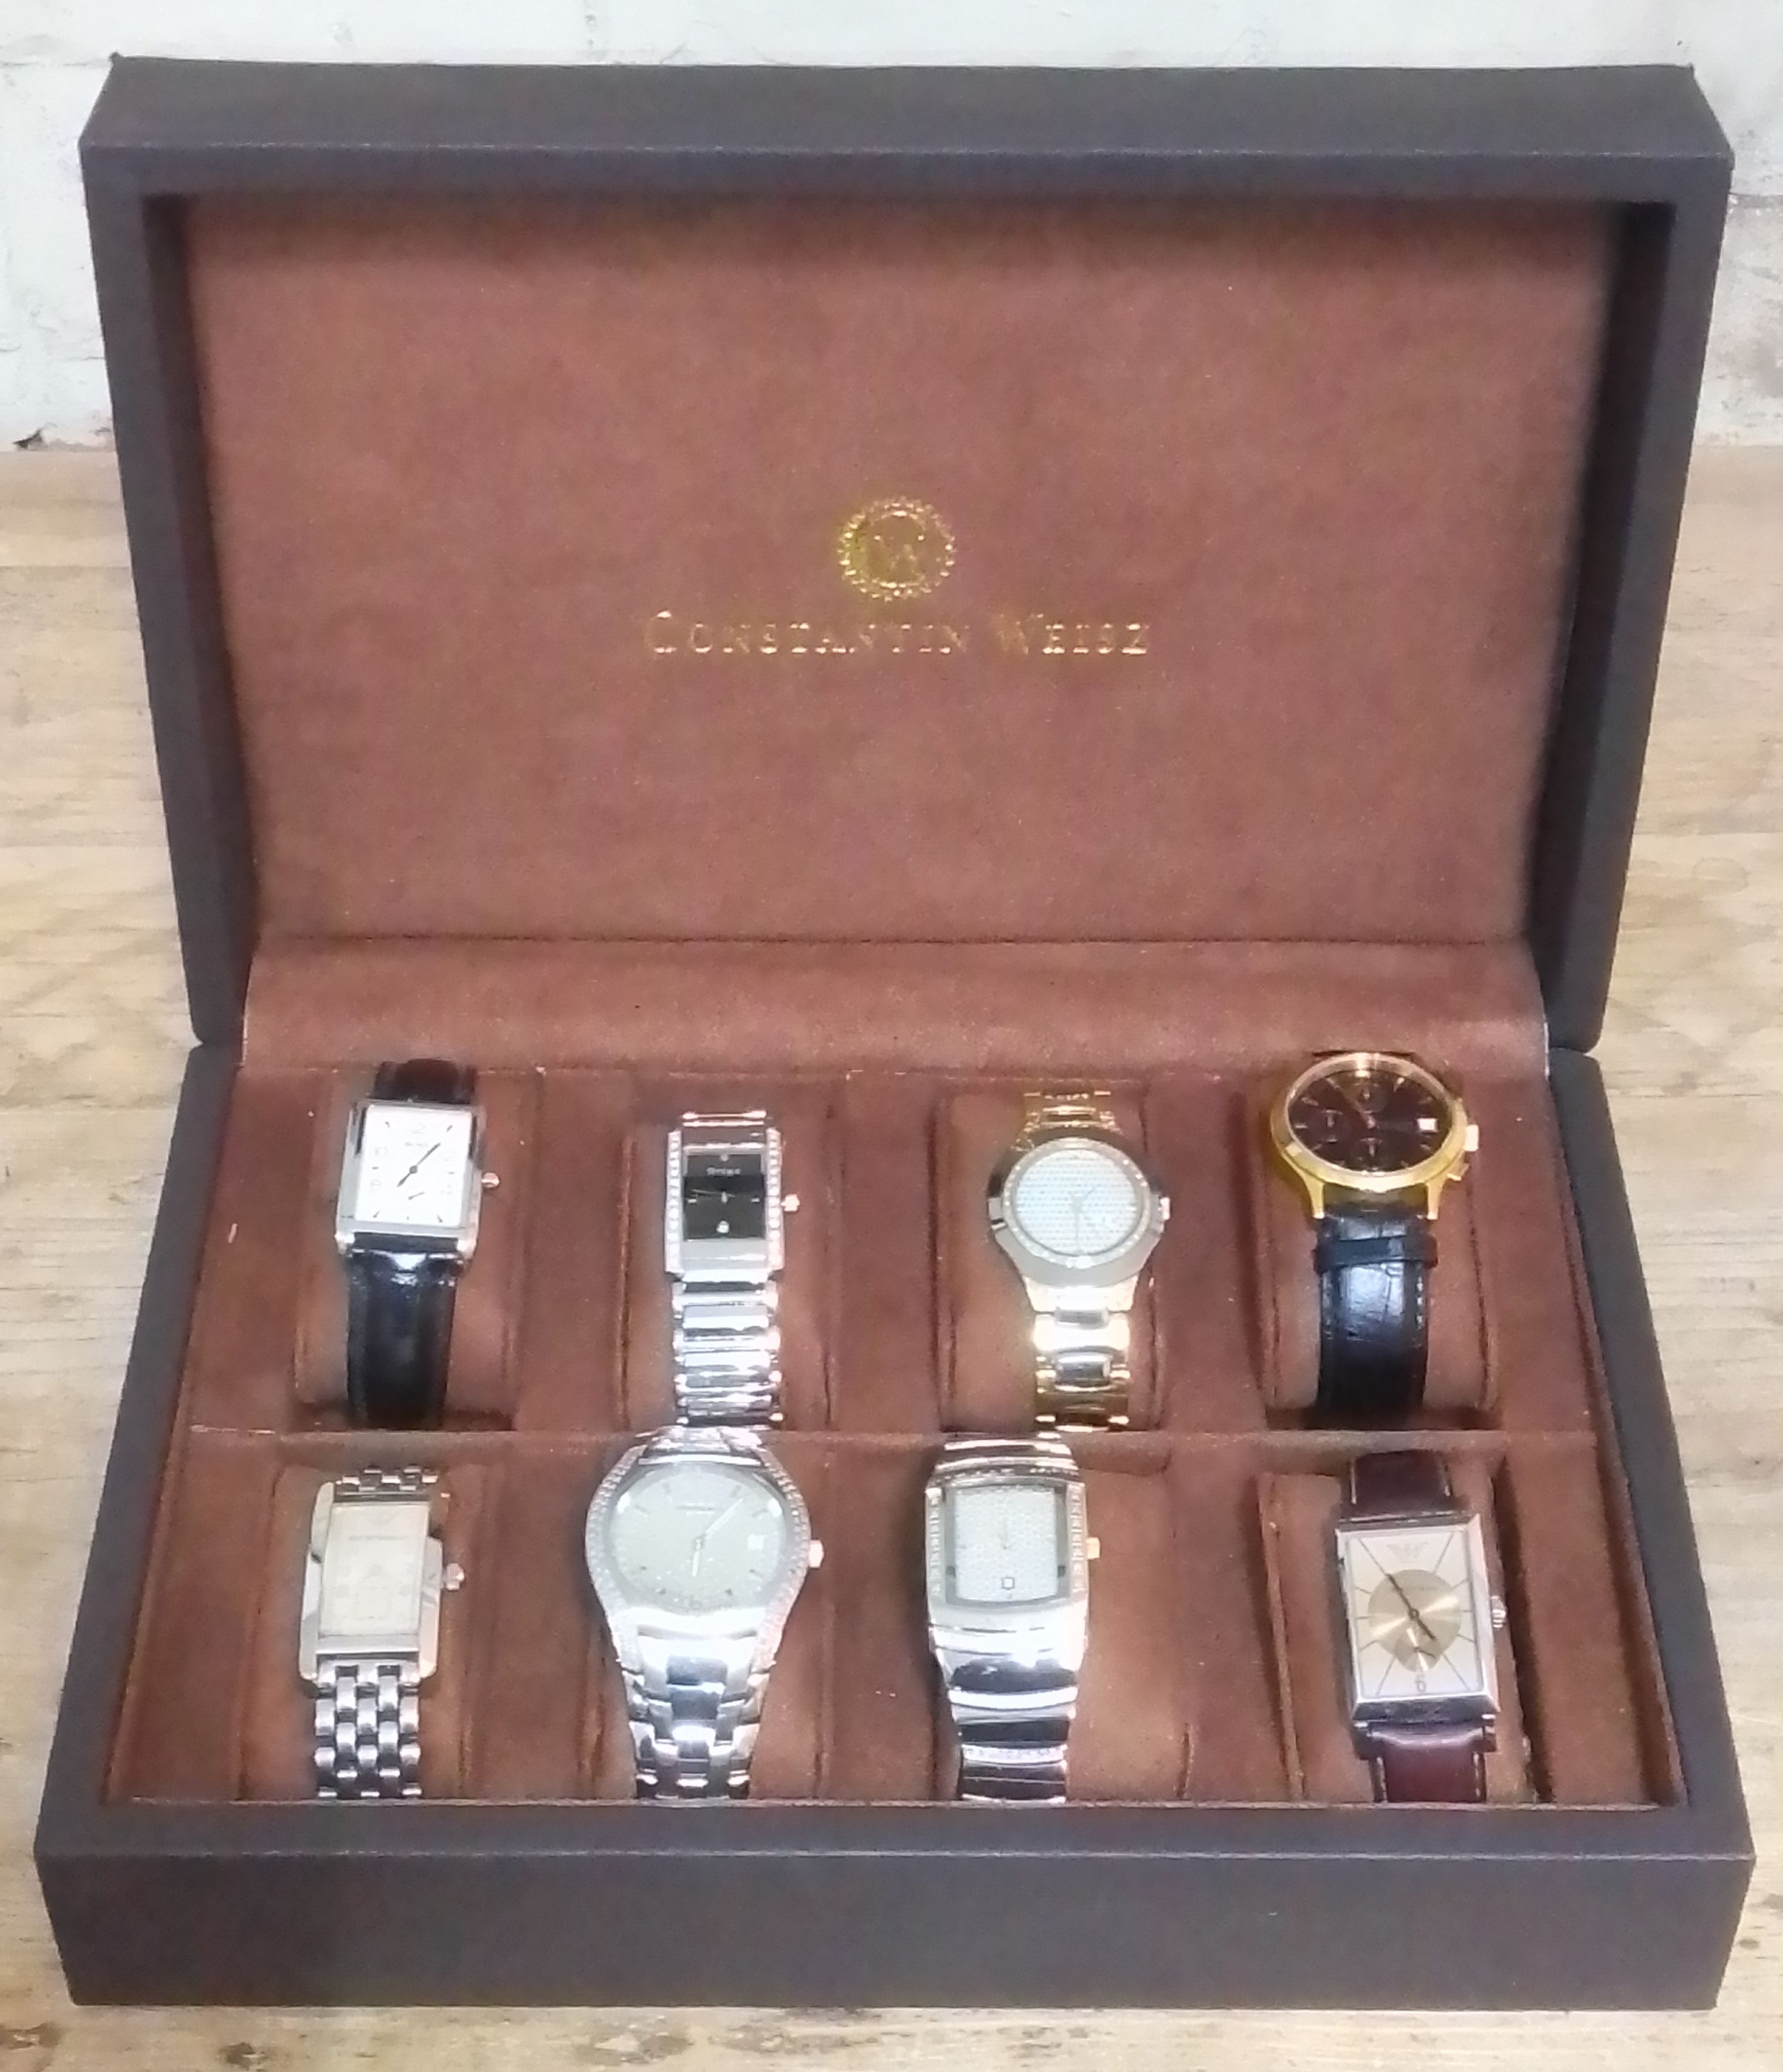 A Constantin Weisz watch box and contents including Armani, Boss, Diamond & Co, etc.